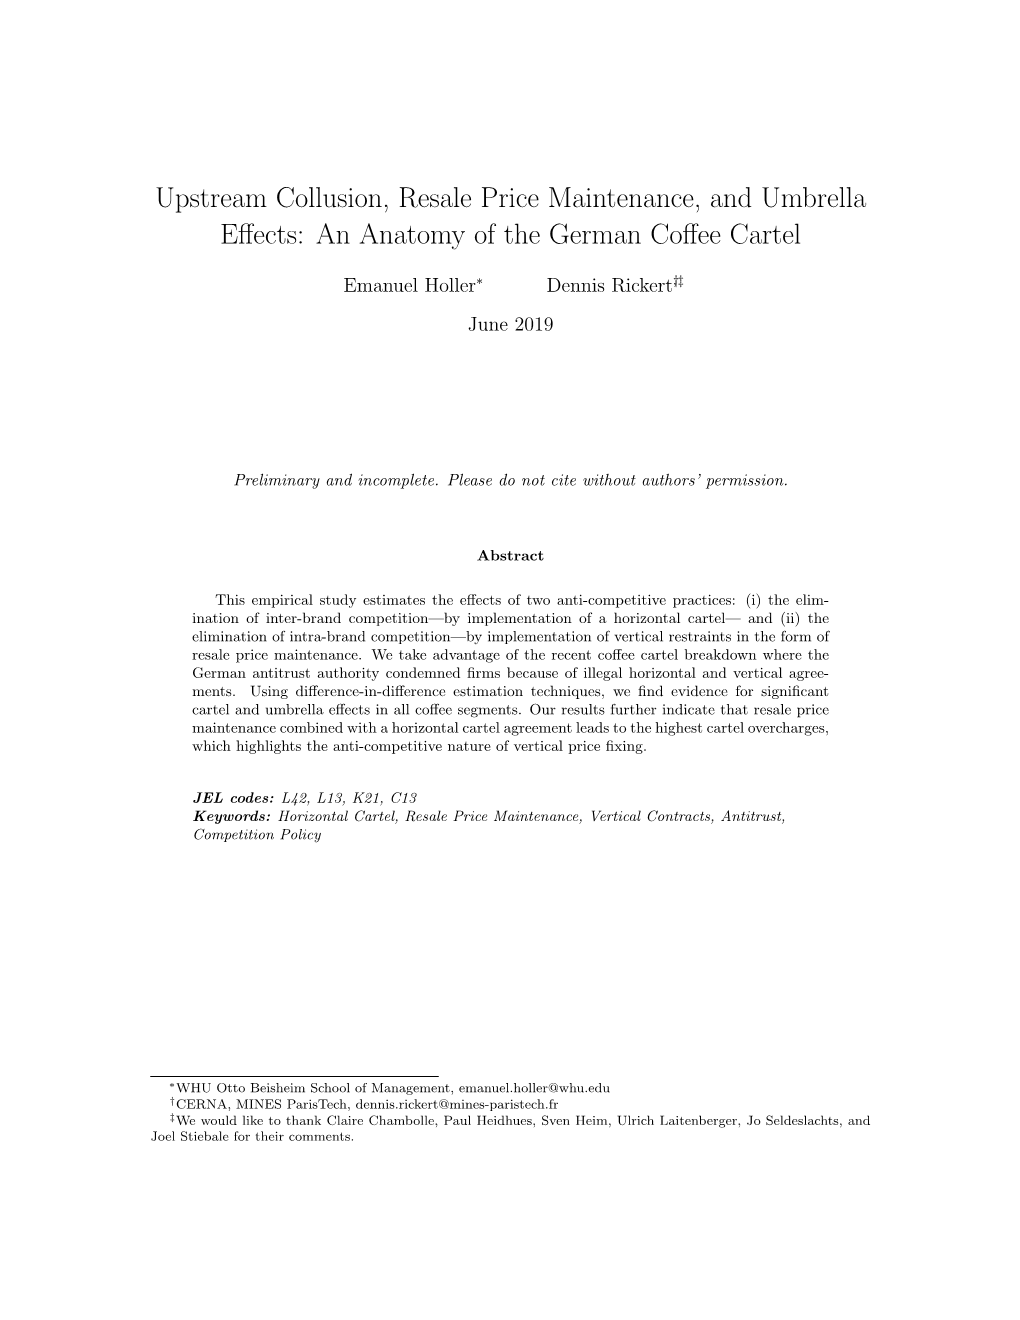 Upstream Collusion, Vertical Restraints, and Umbrella Effects